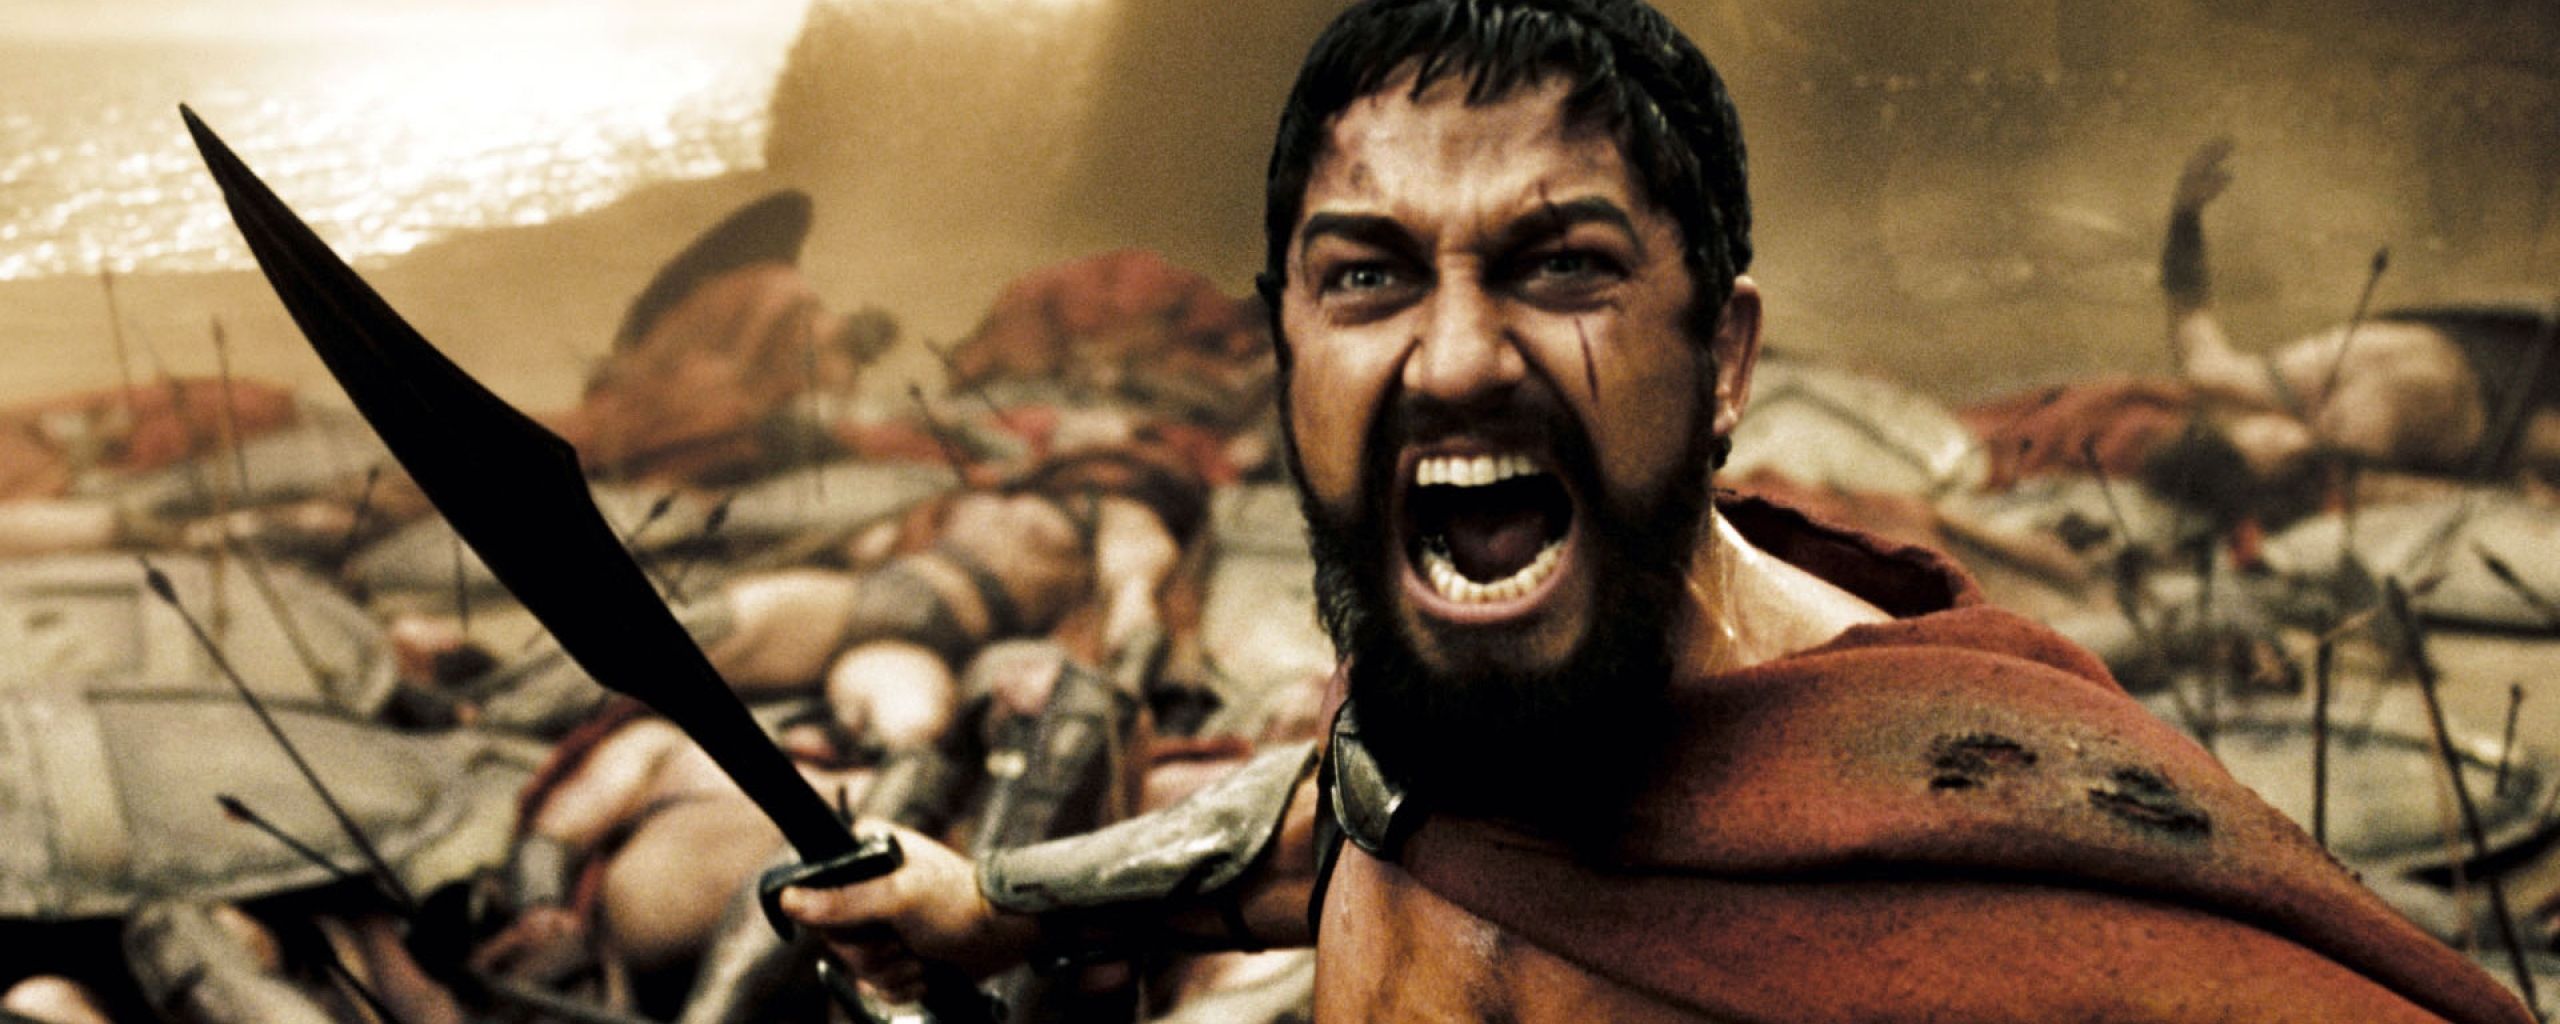 Download Wallpaper 2560x1024 This is sparta, 300, King, Leonidas ...